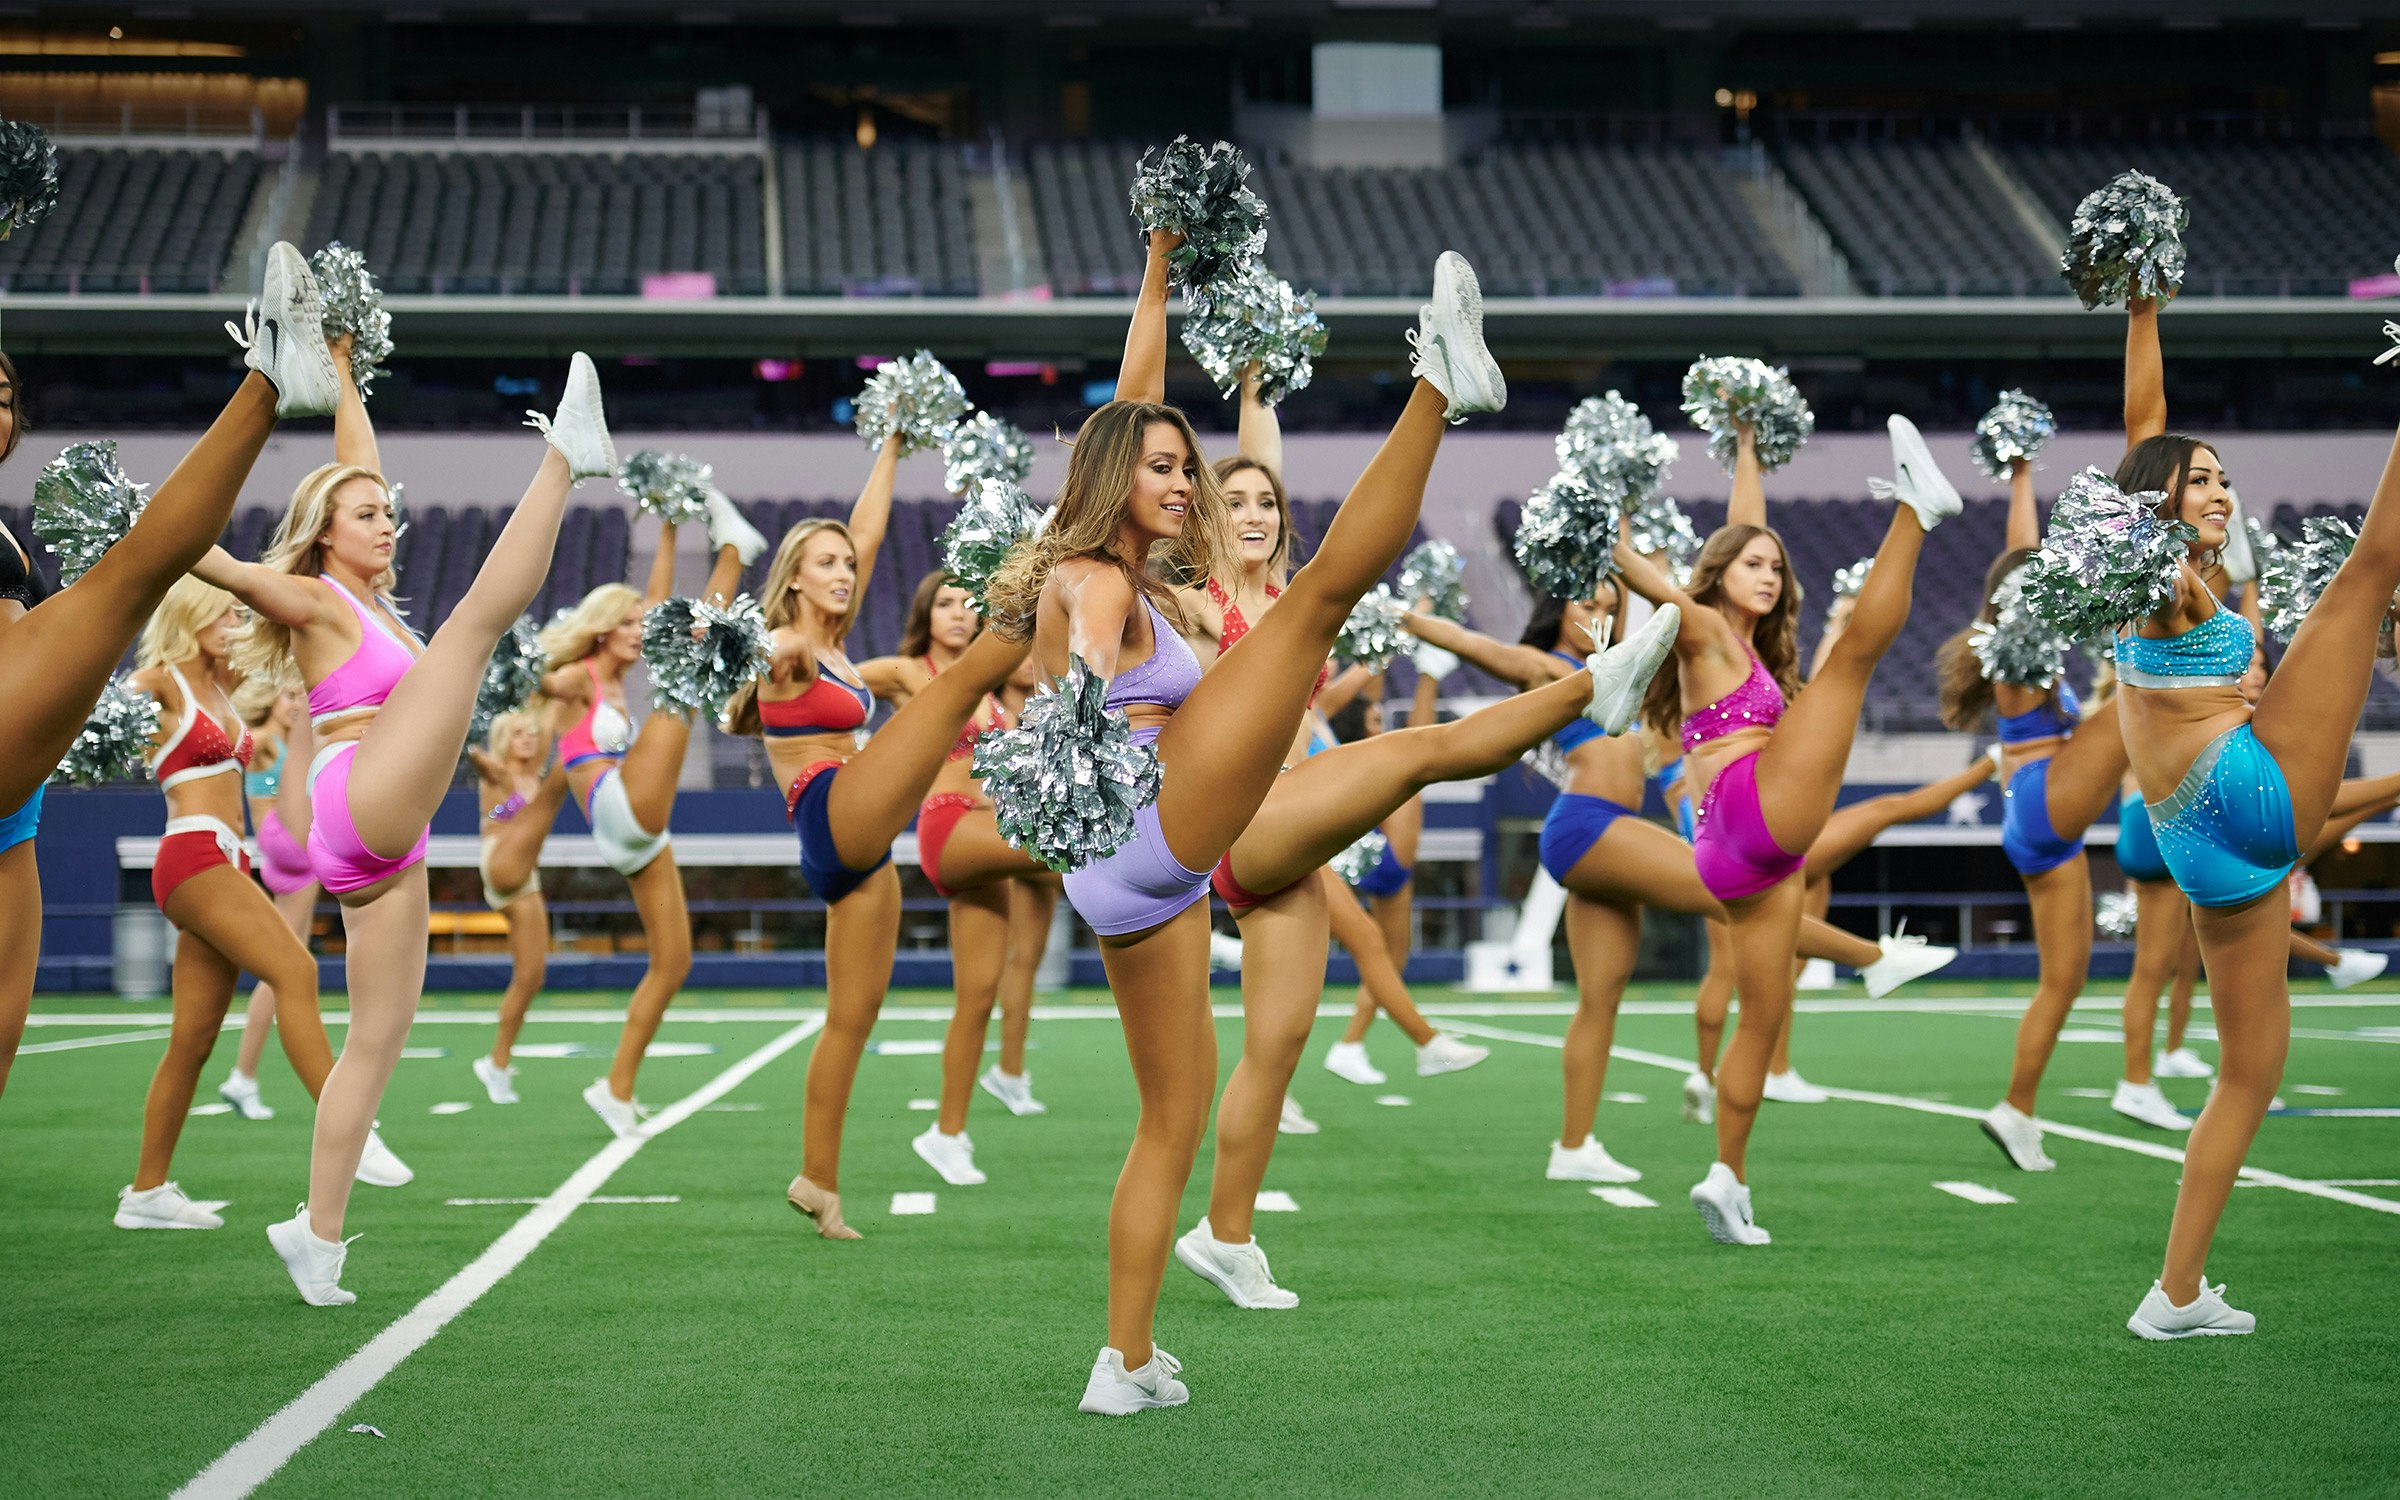 The Dallas Cowboys Cheerleaders Reality Show Ends Its Run on CMT